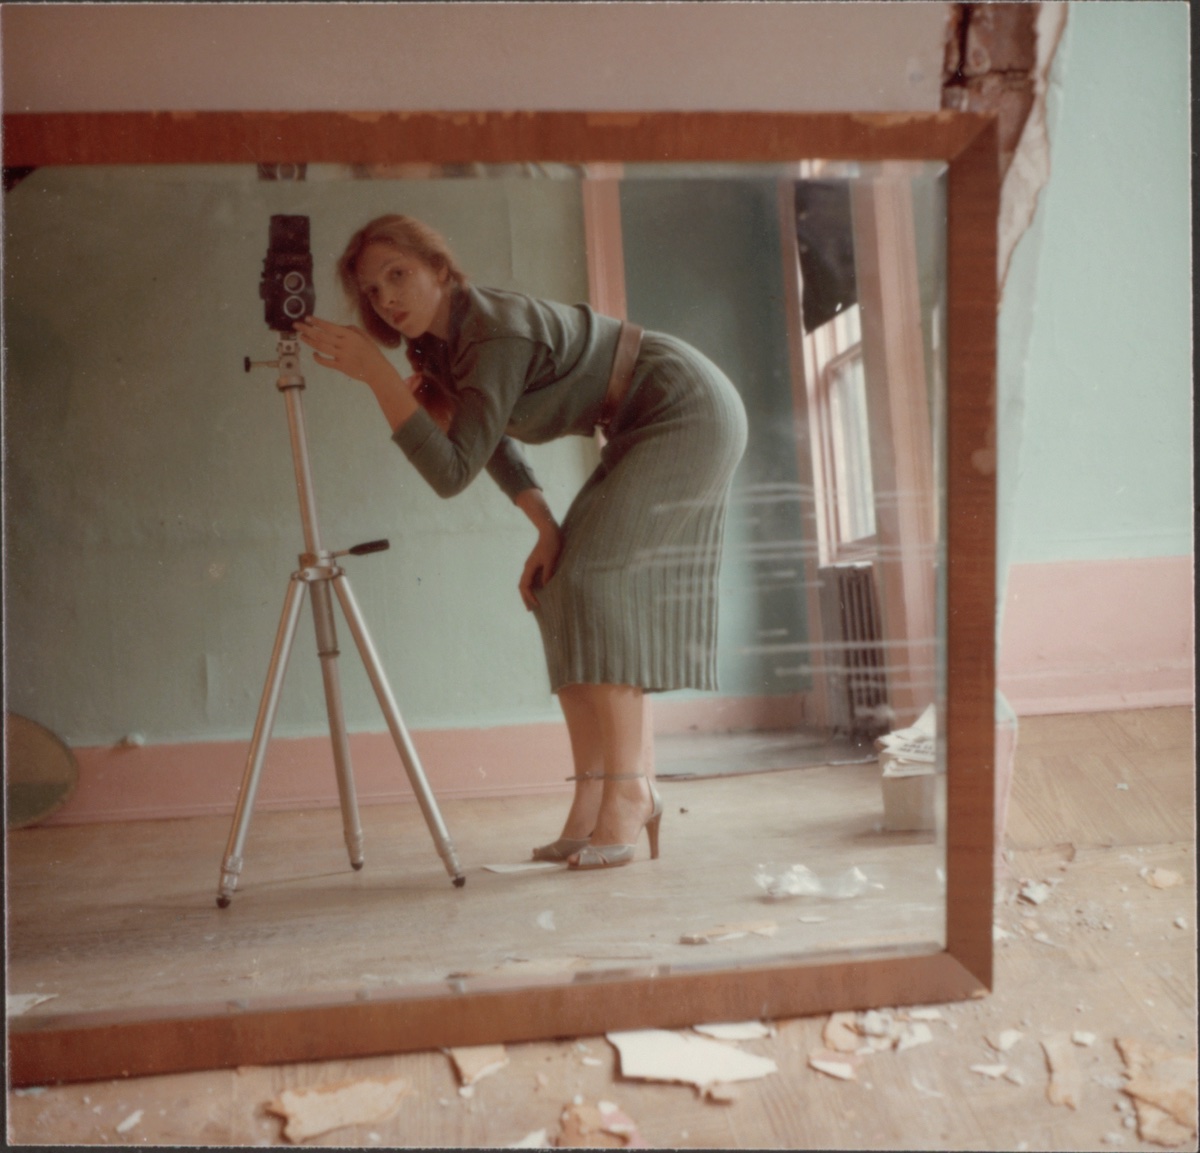 The Wick - Francesca Woodman, Untitled, New York, 1979.
Courtesy The Woodman Family Foundation and
Victoria Miro
©Woodman Family Foundation/DACS, London 2021